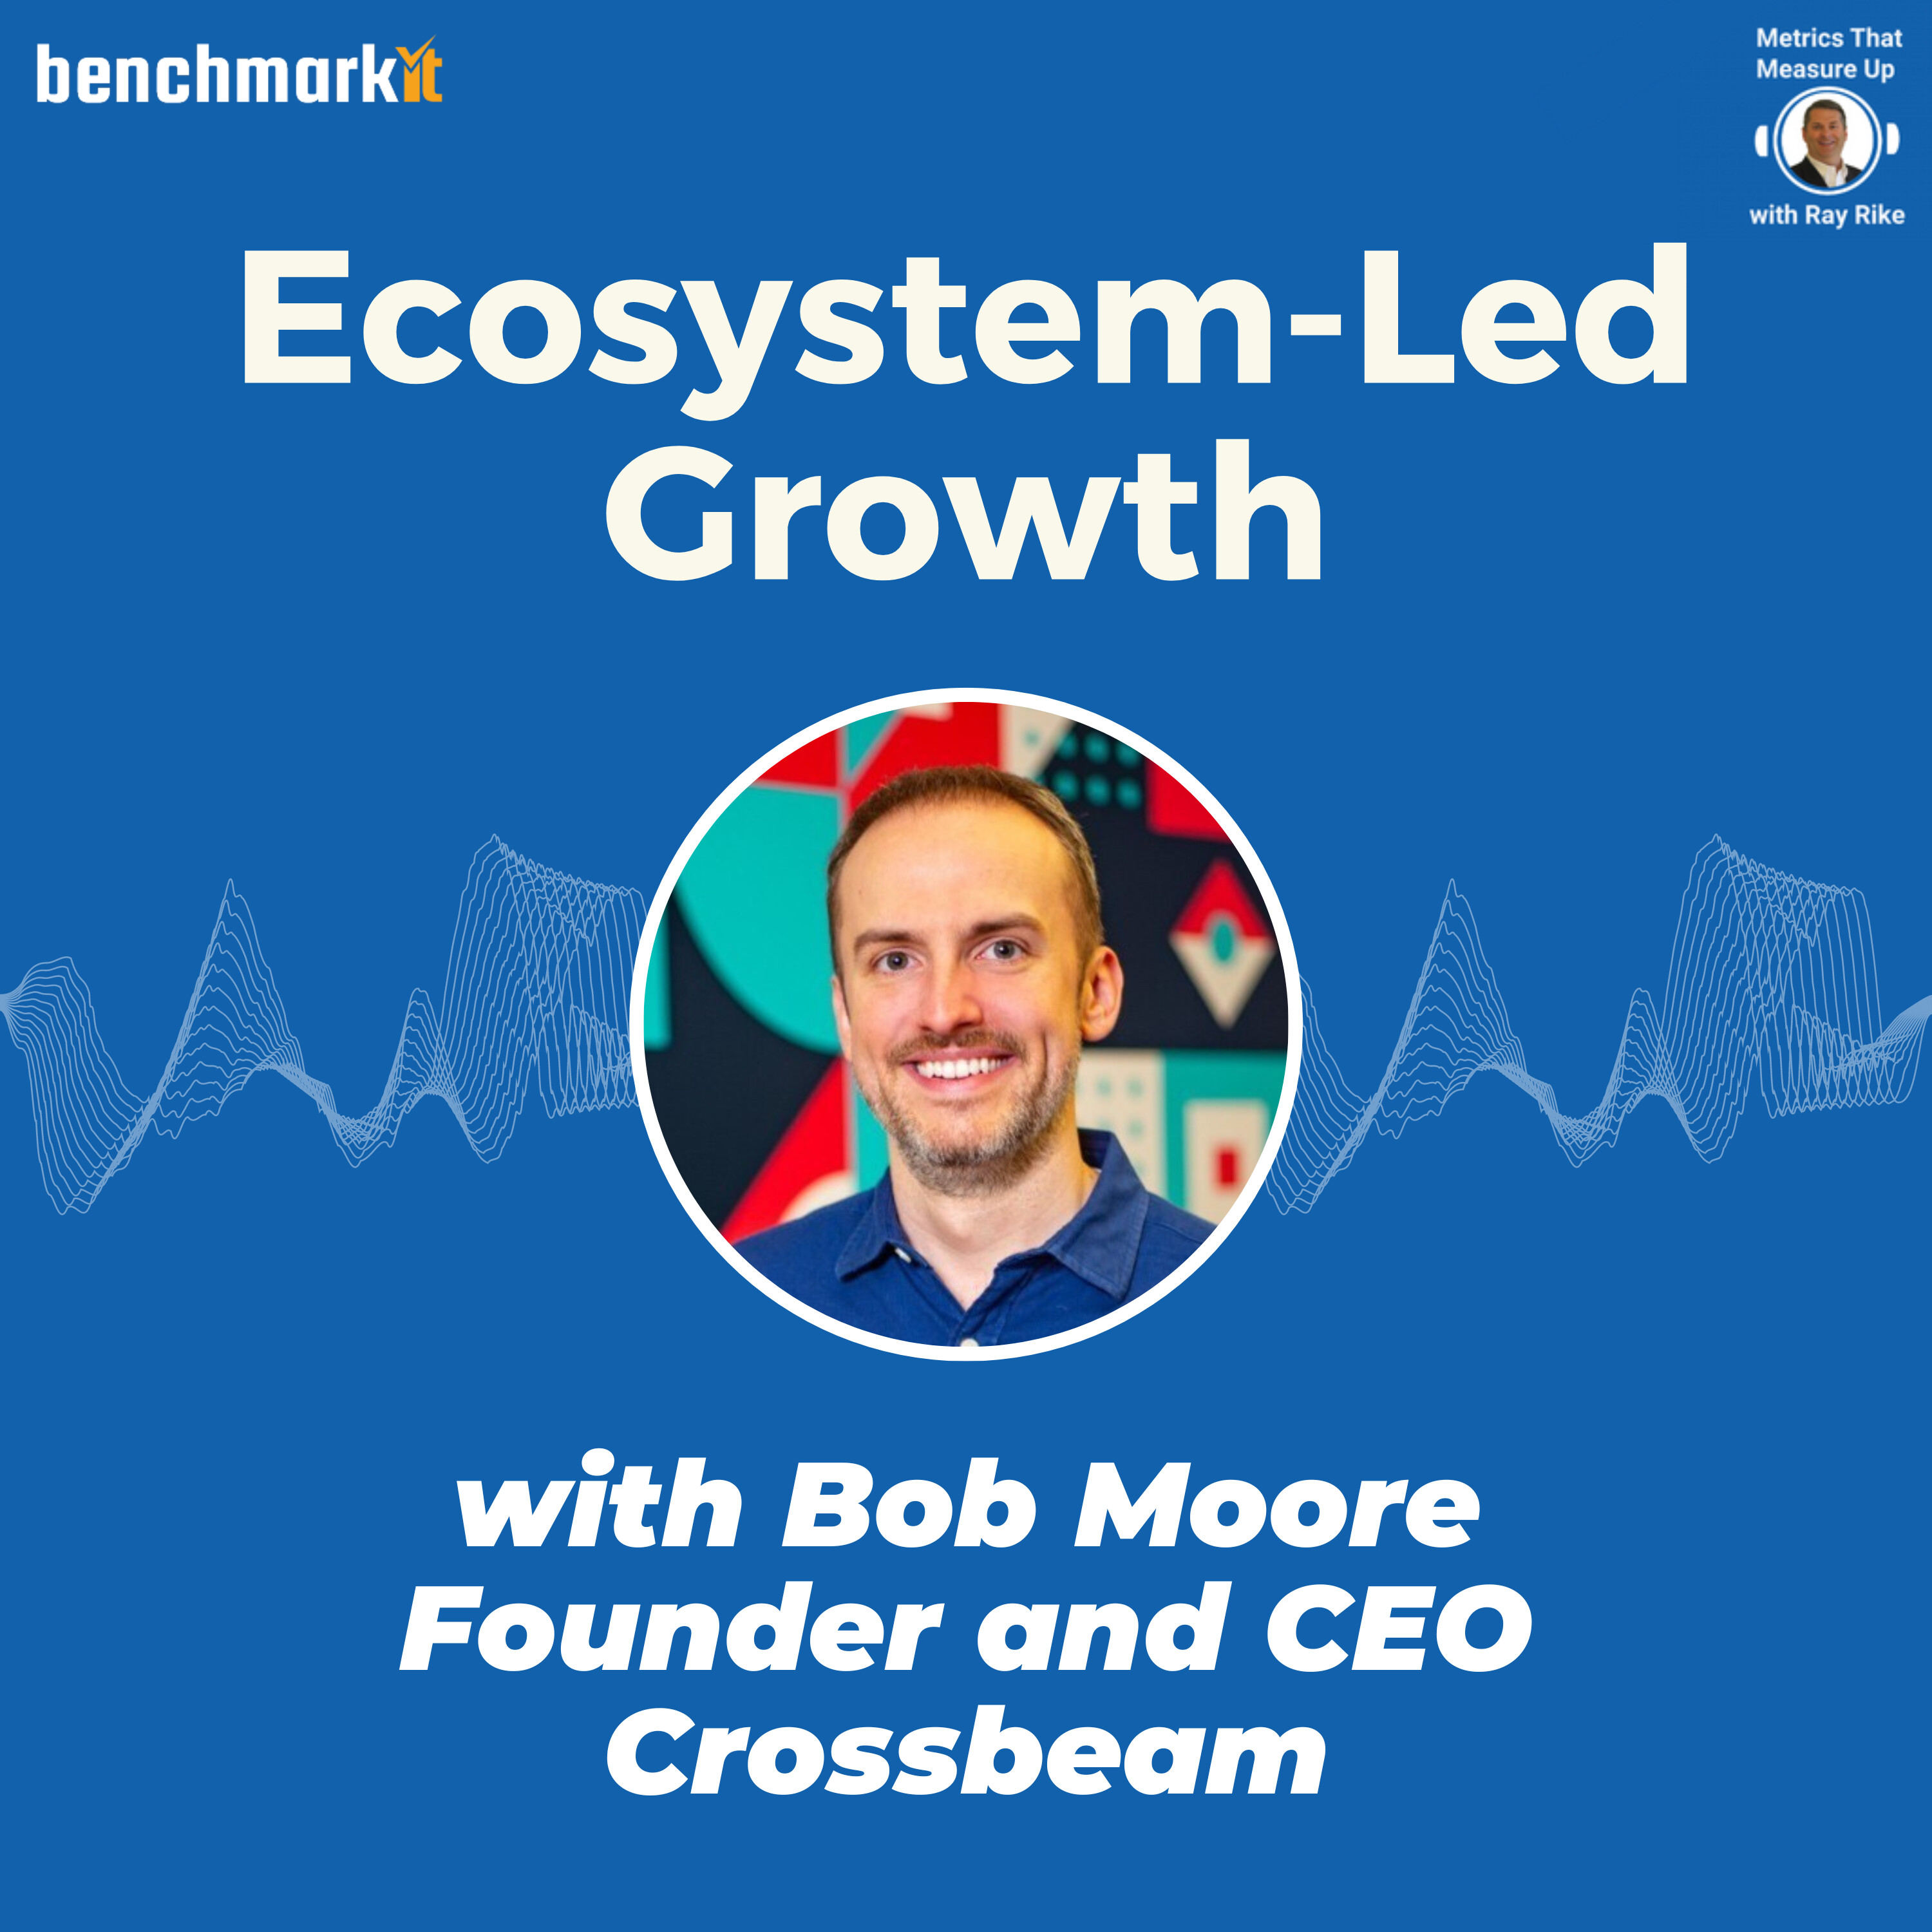 Ecosystem-Led Growth - with Bob Moore, Founder and CEO Crossbeam